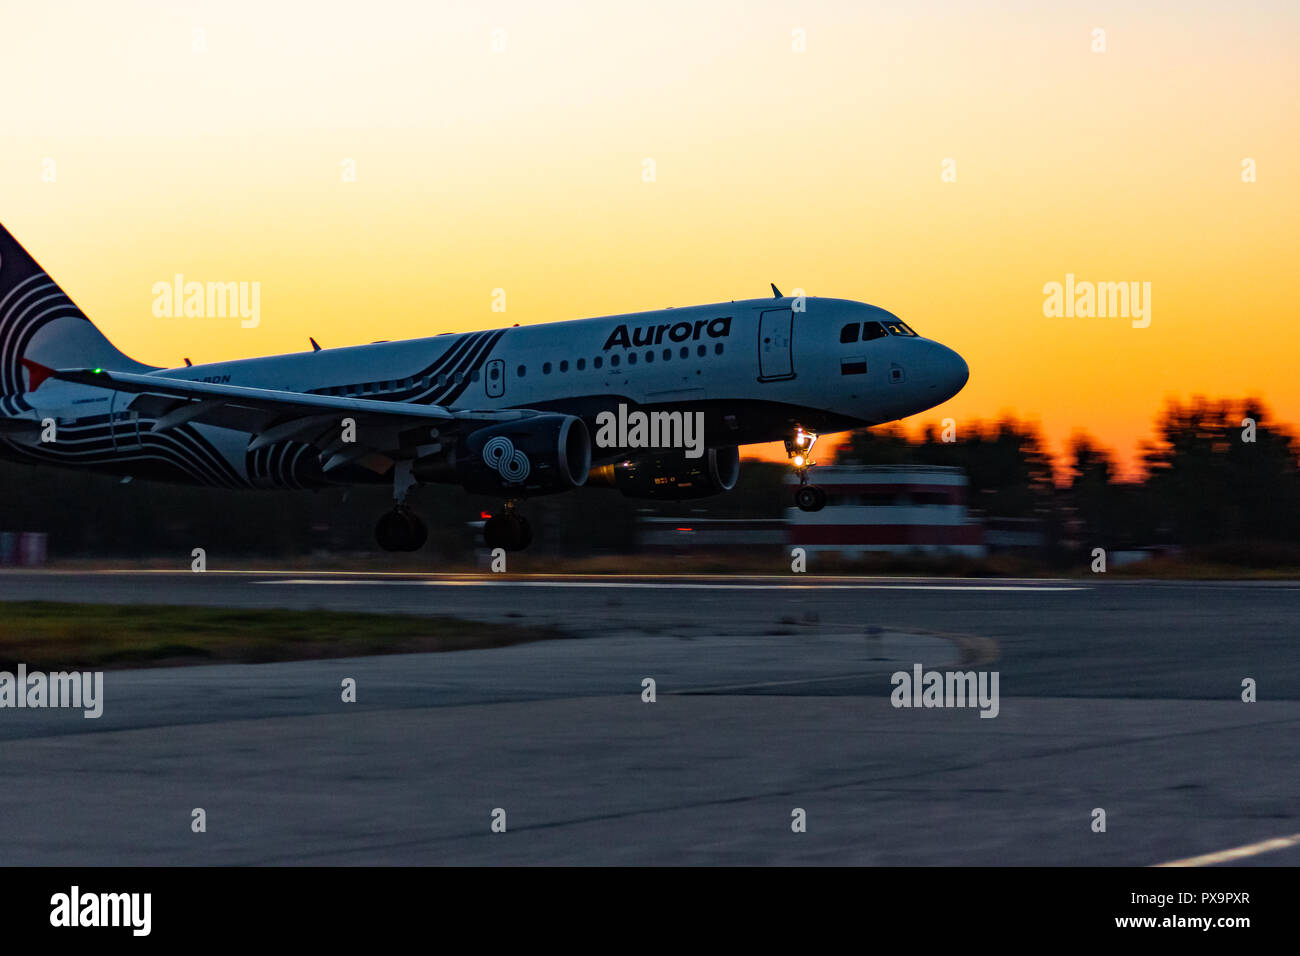 KHABAROVSK, RUSSIA - SEP 29, 2018: Aircraft Airbus A319-111 VP-BBN Aurora airline lands at the airport of Khabarovsk. Stock Photo